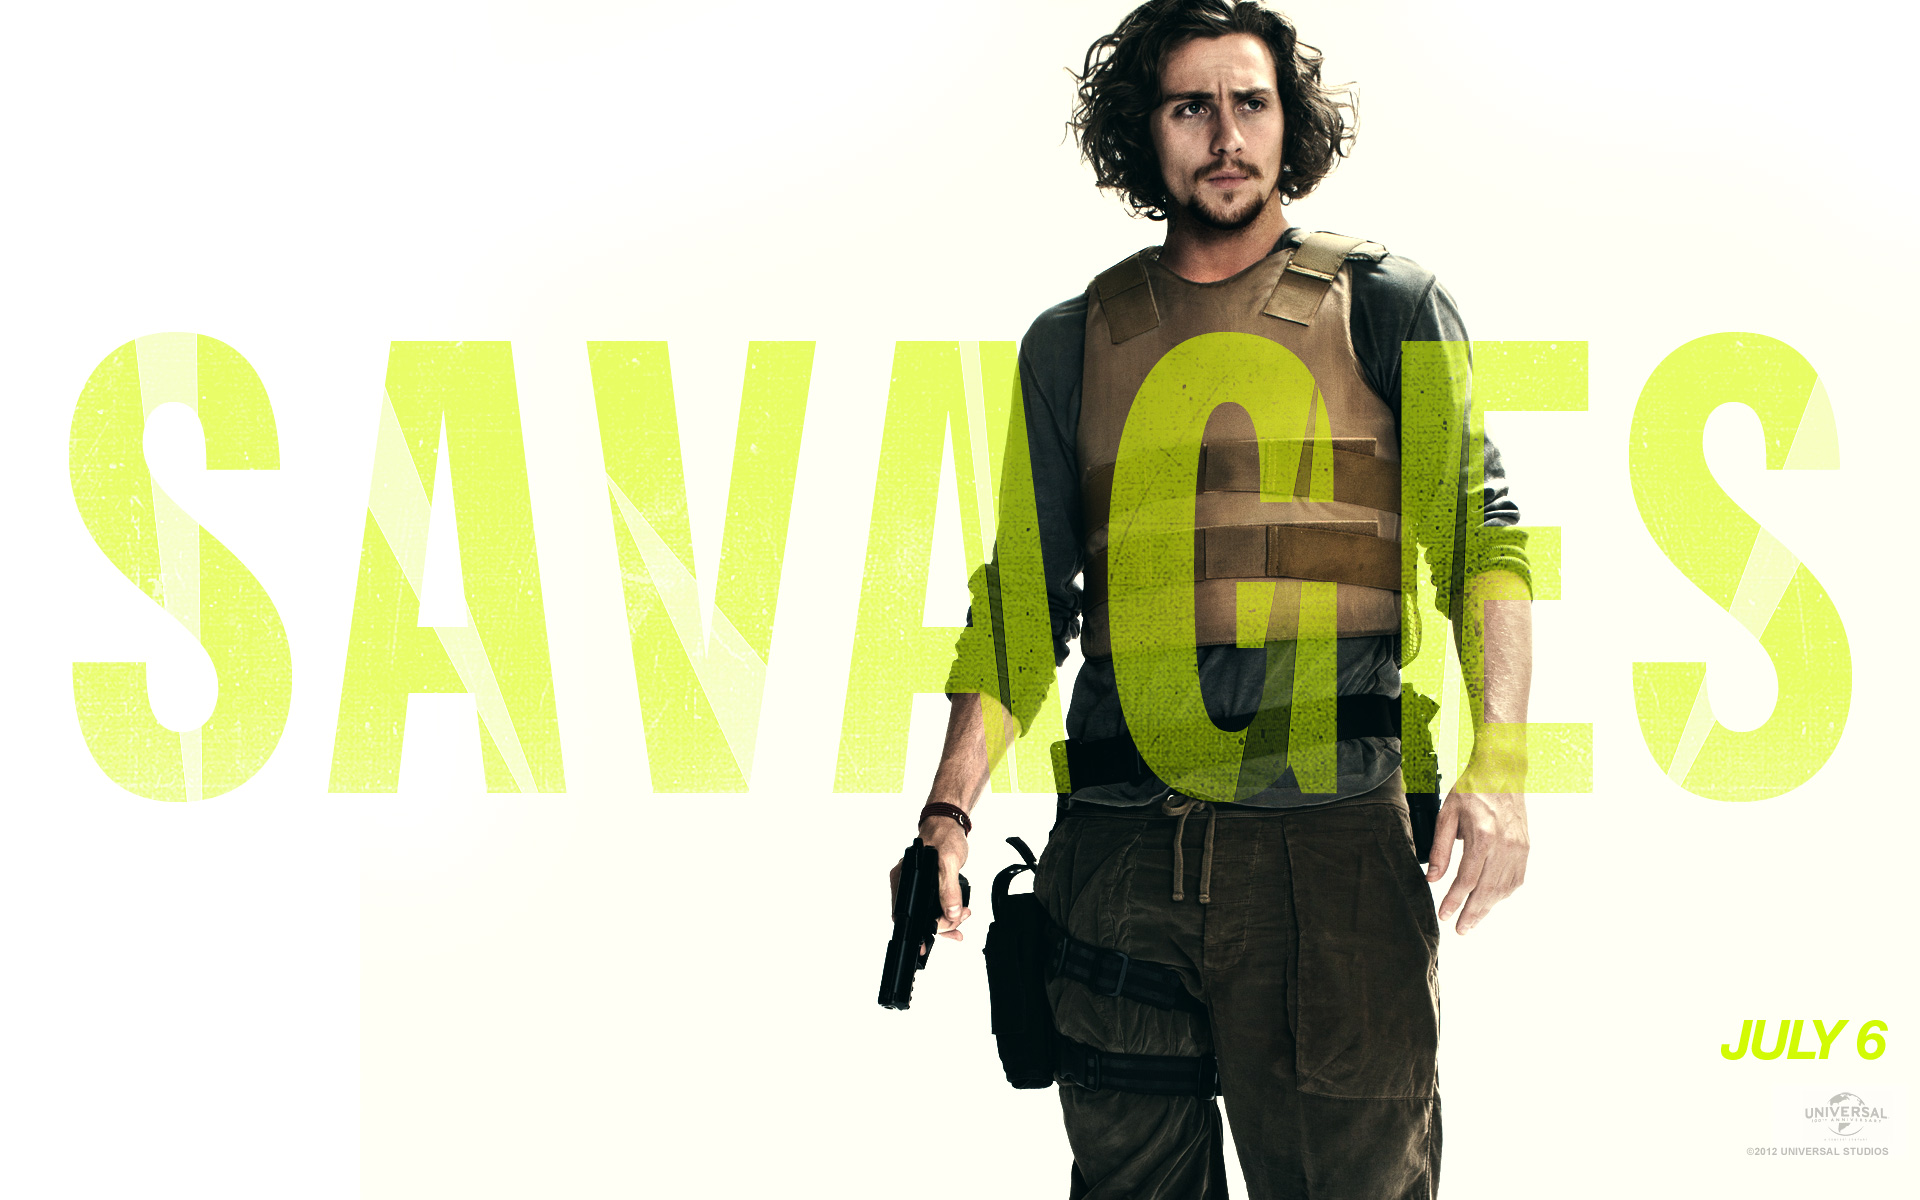 Movie Savages HD Wallpaper | Background Image